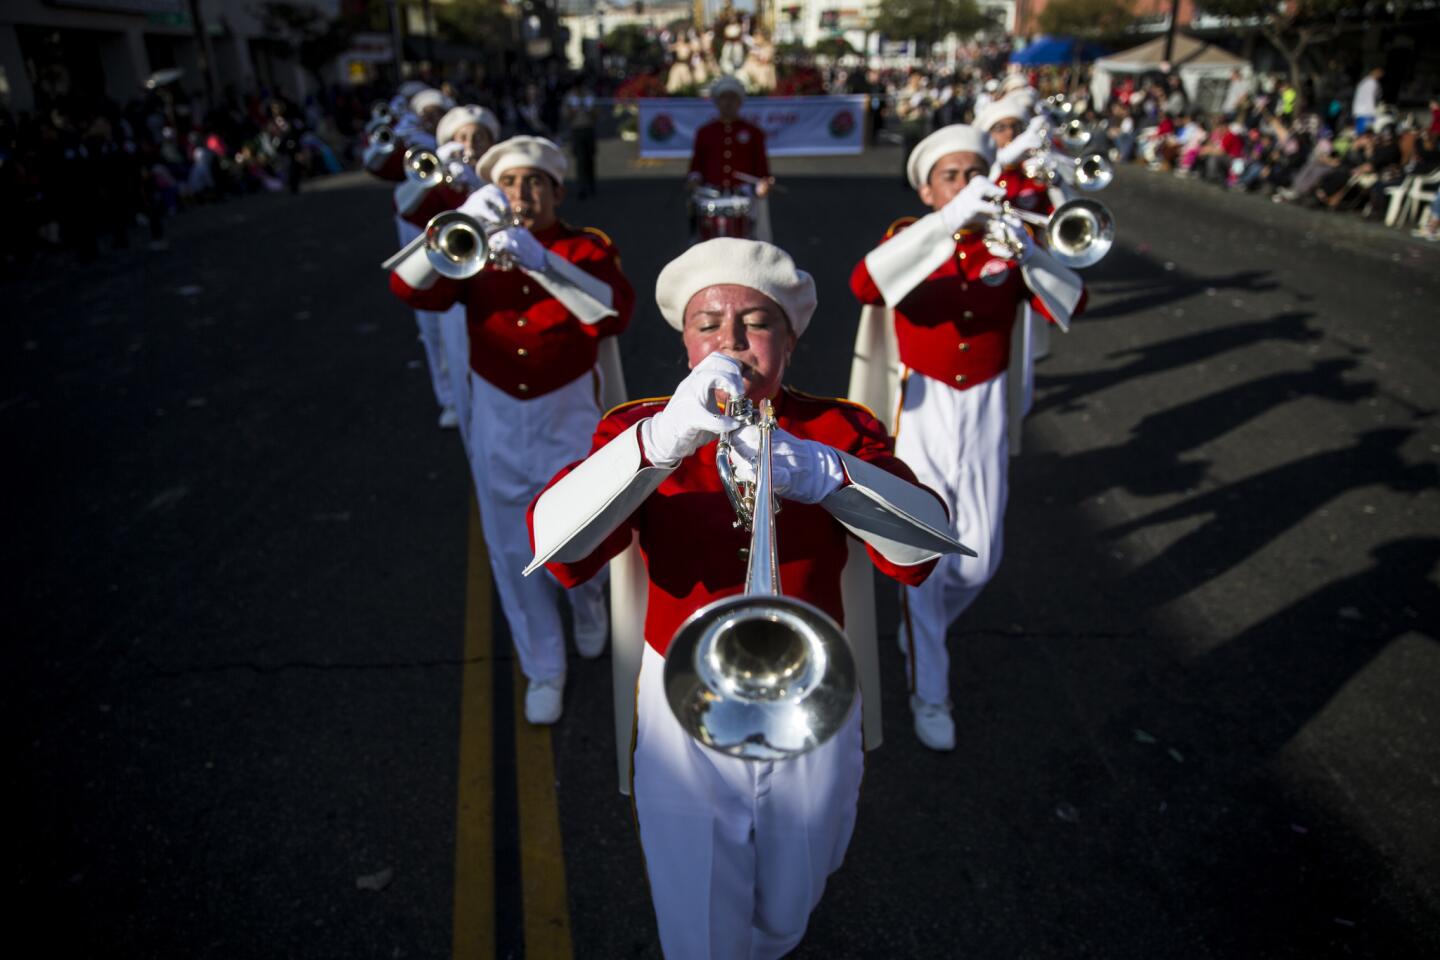 The Pasadena City College Tournament of Roses Herald Trumpets march in formation during the 2018 Rose Parade in Pasadena